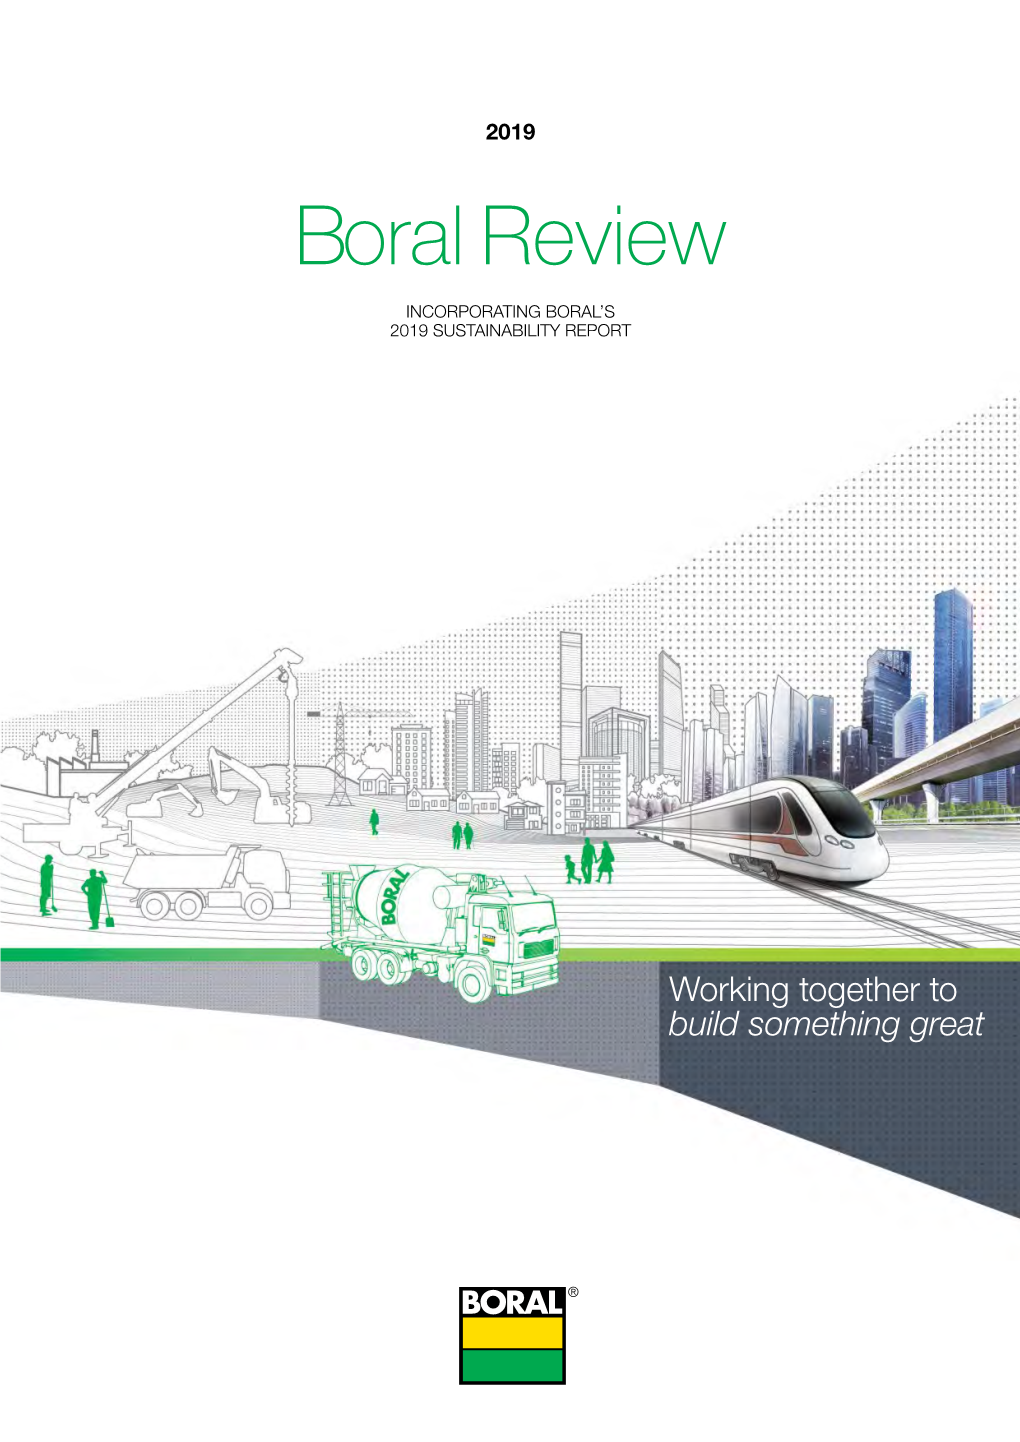 Boral Review 2019